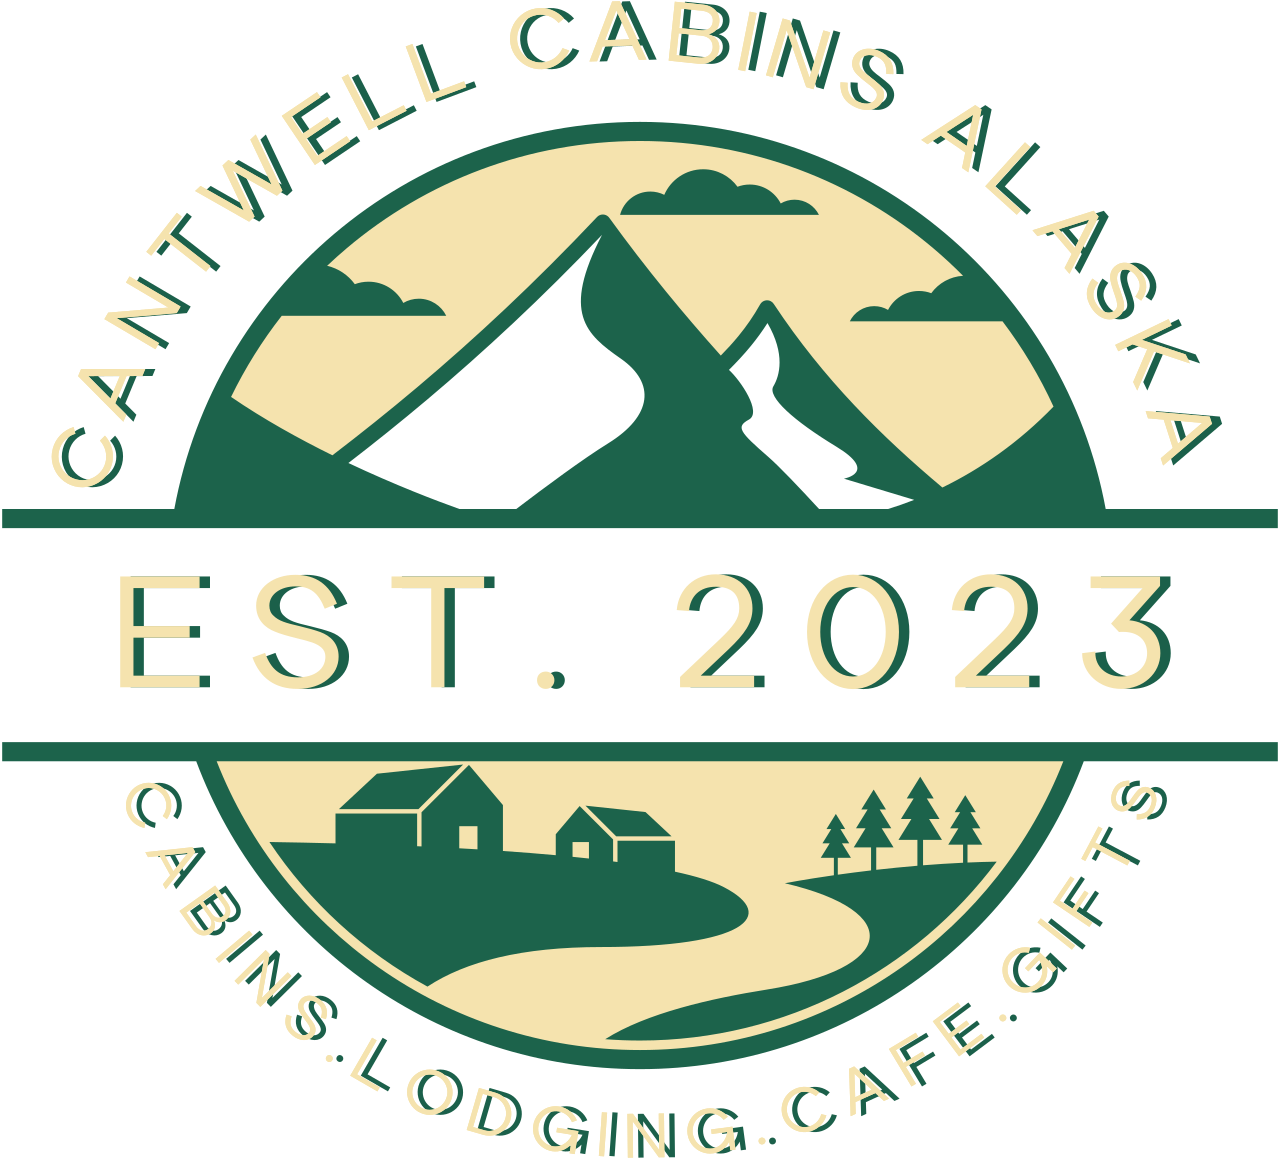 CANTWELL CABINS